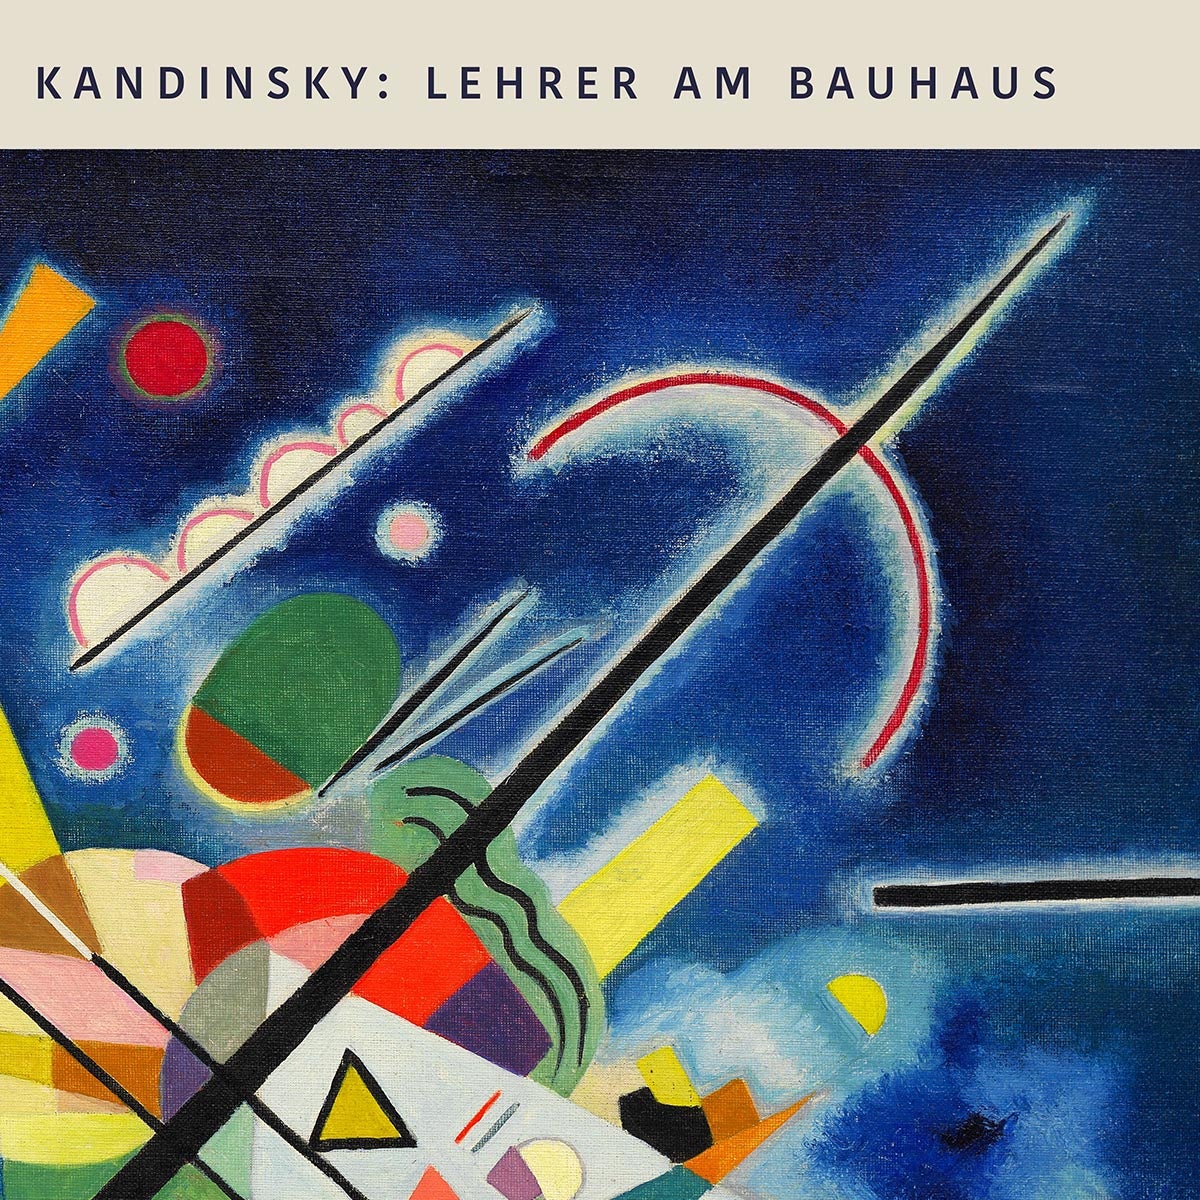 Blue Painting by Wassily Kandinsky Exhibition Poster